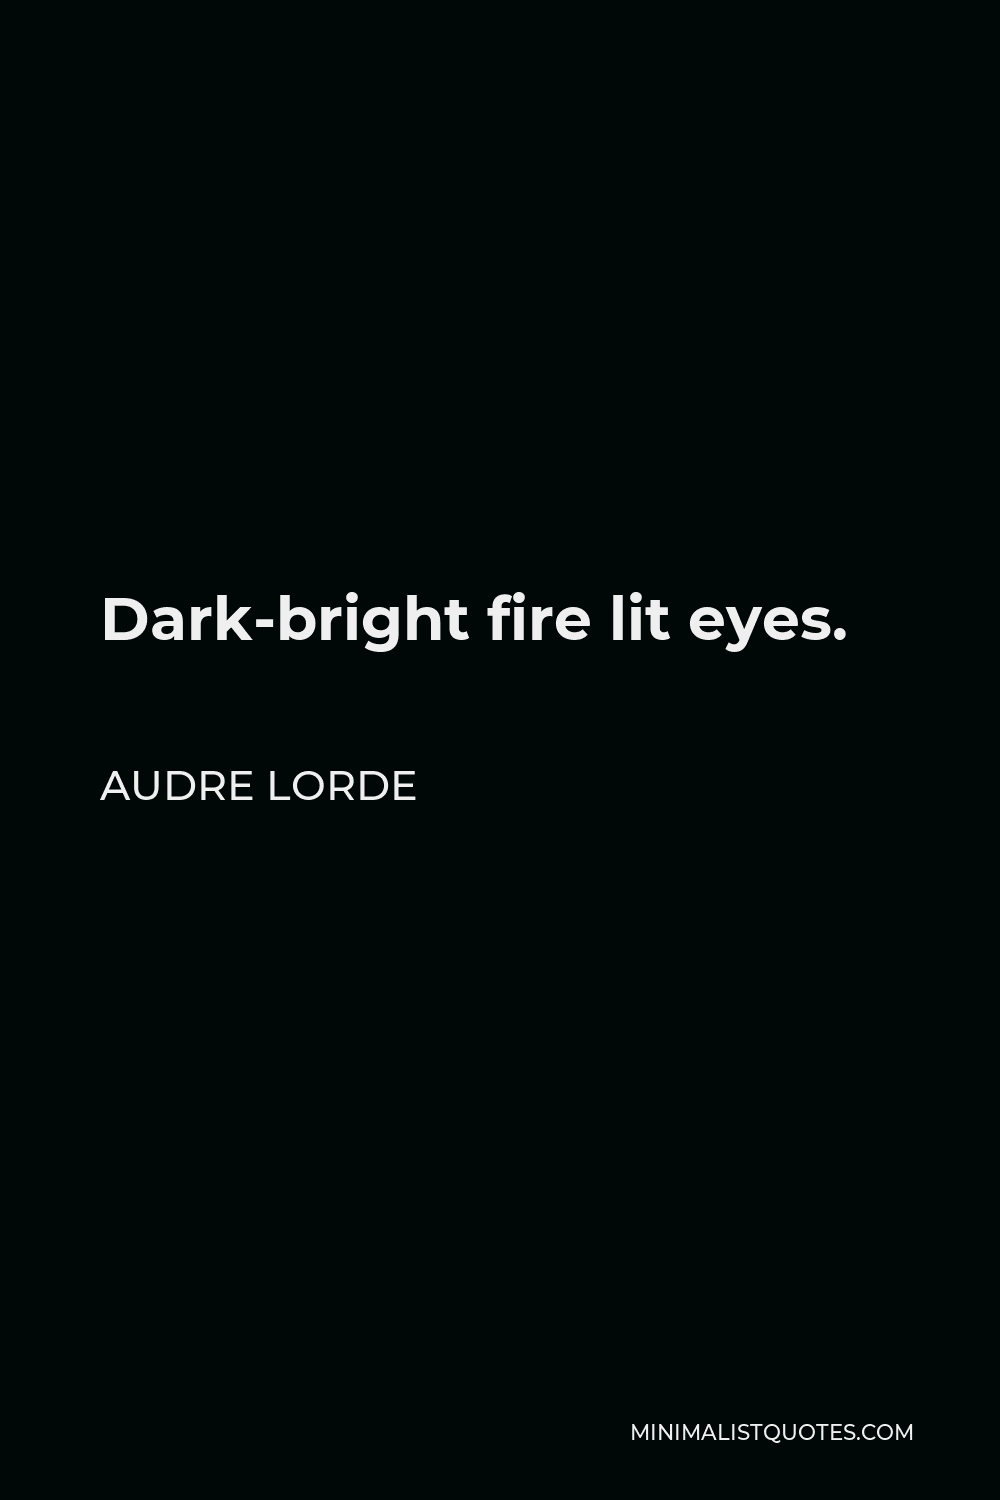 Audre Lorde Quote - Dark-bright fire lit eyes.